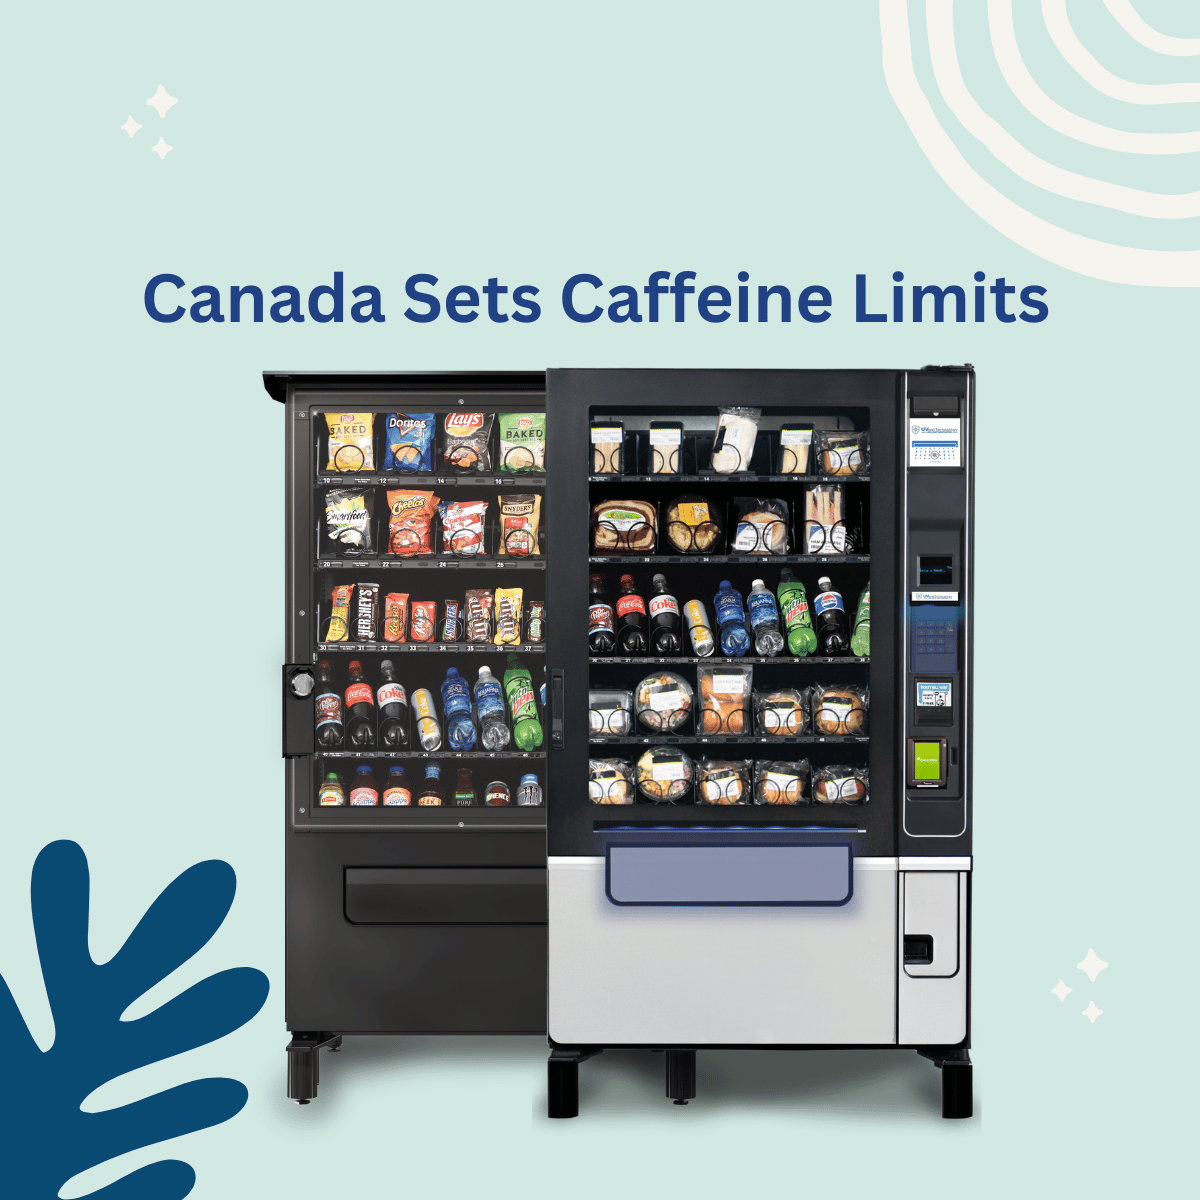 VENDING IN THE NEWS: CANADA CREATES CAFFIENE LIMITS